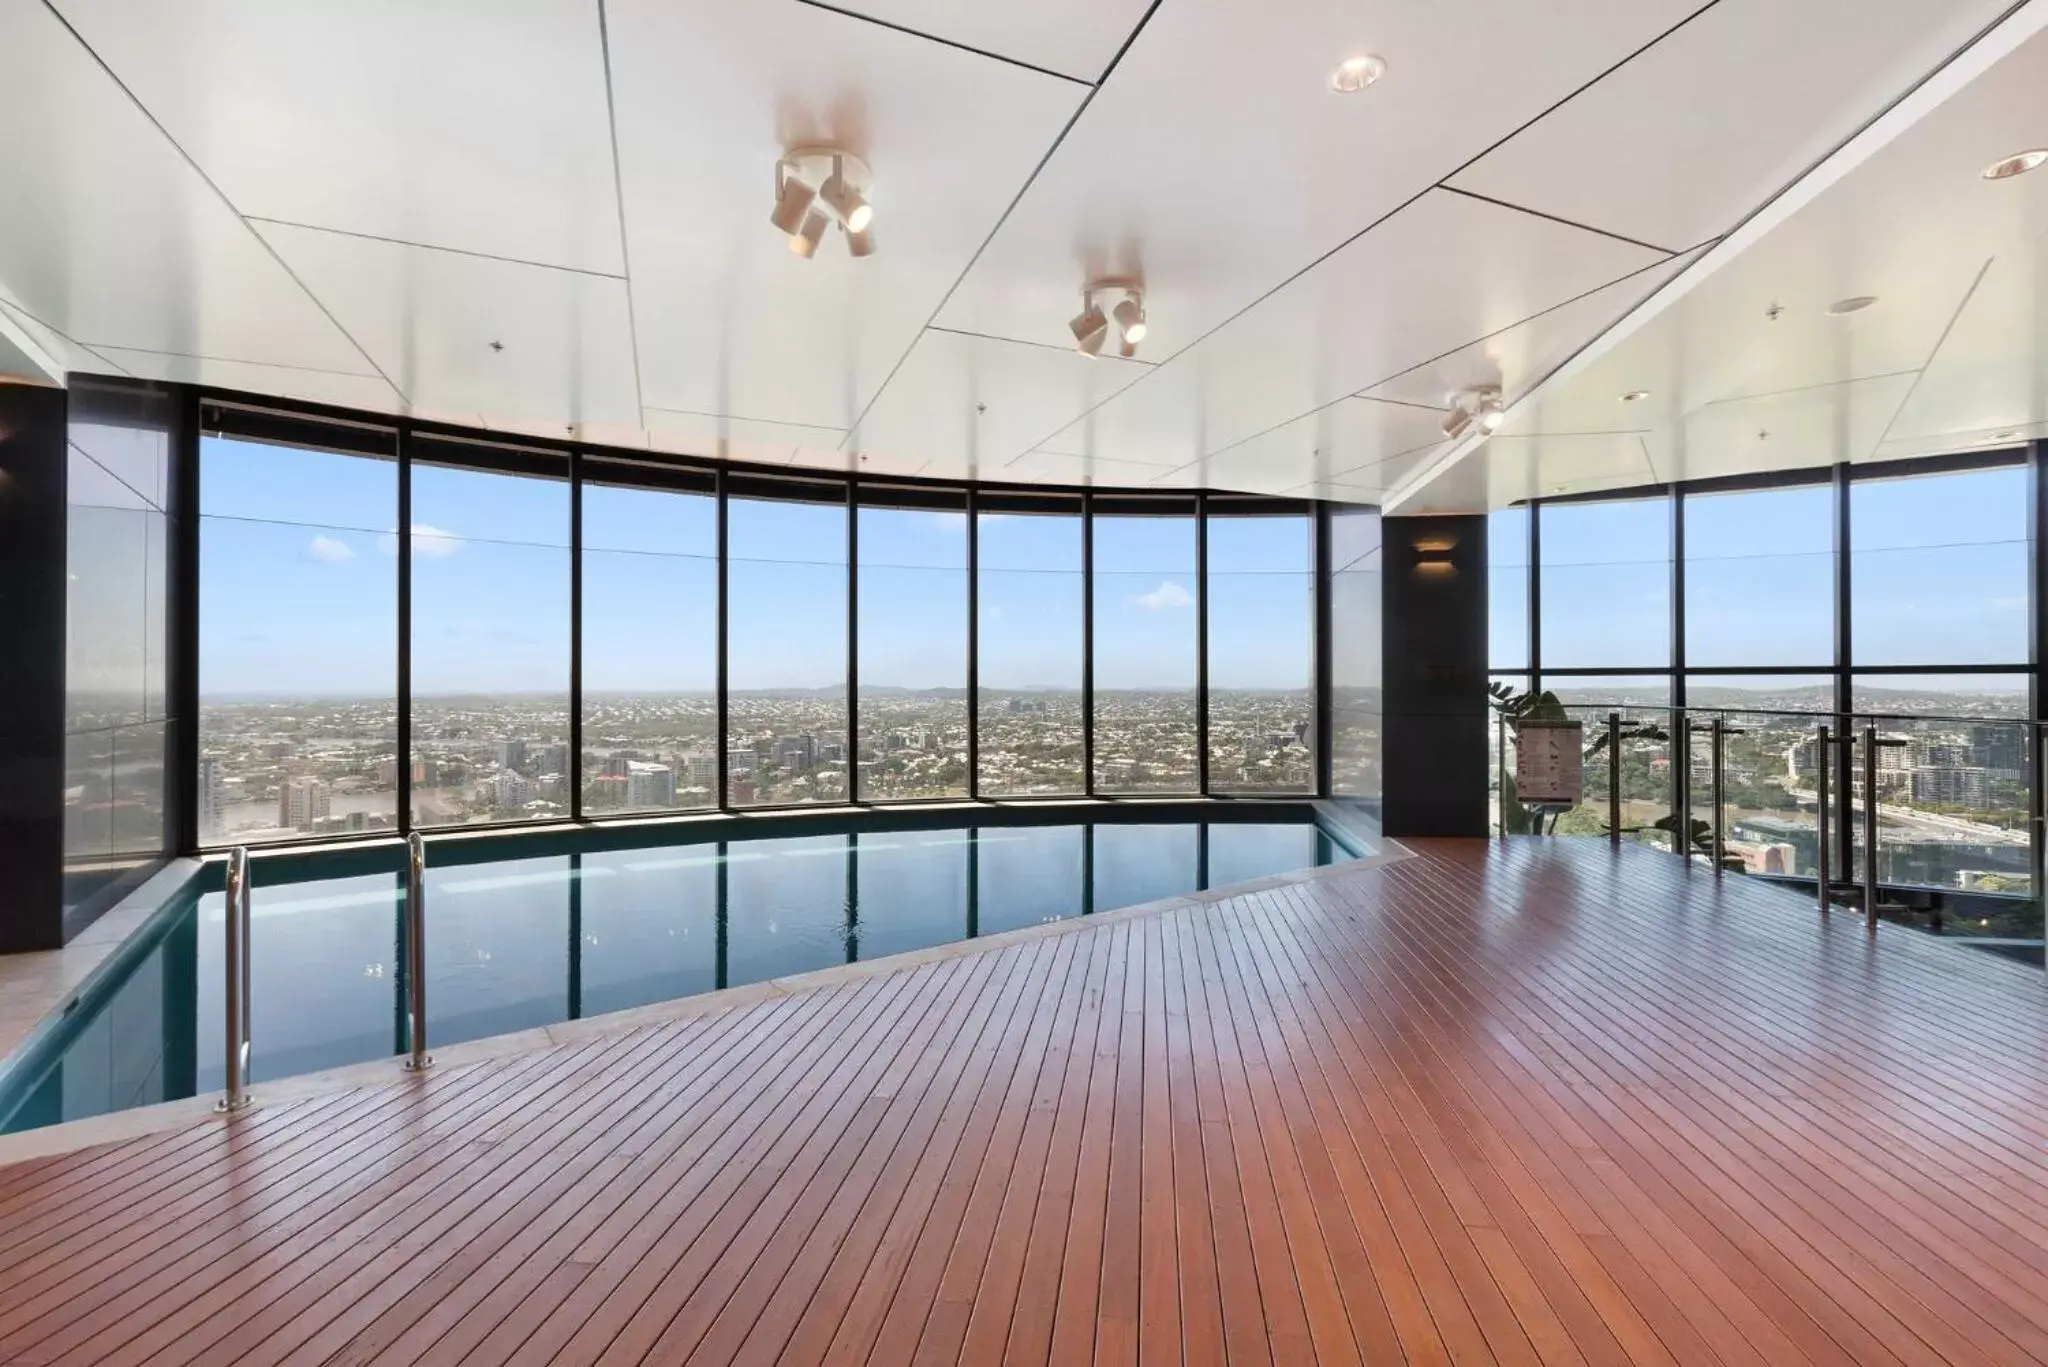 Swimming pool in Brisbane Skytower by CLLIX